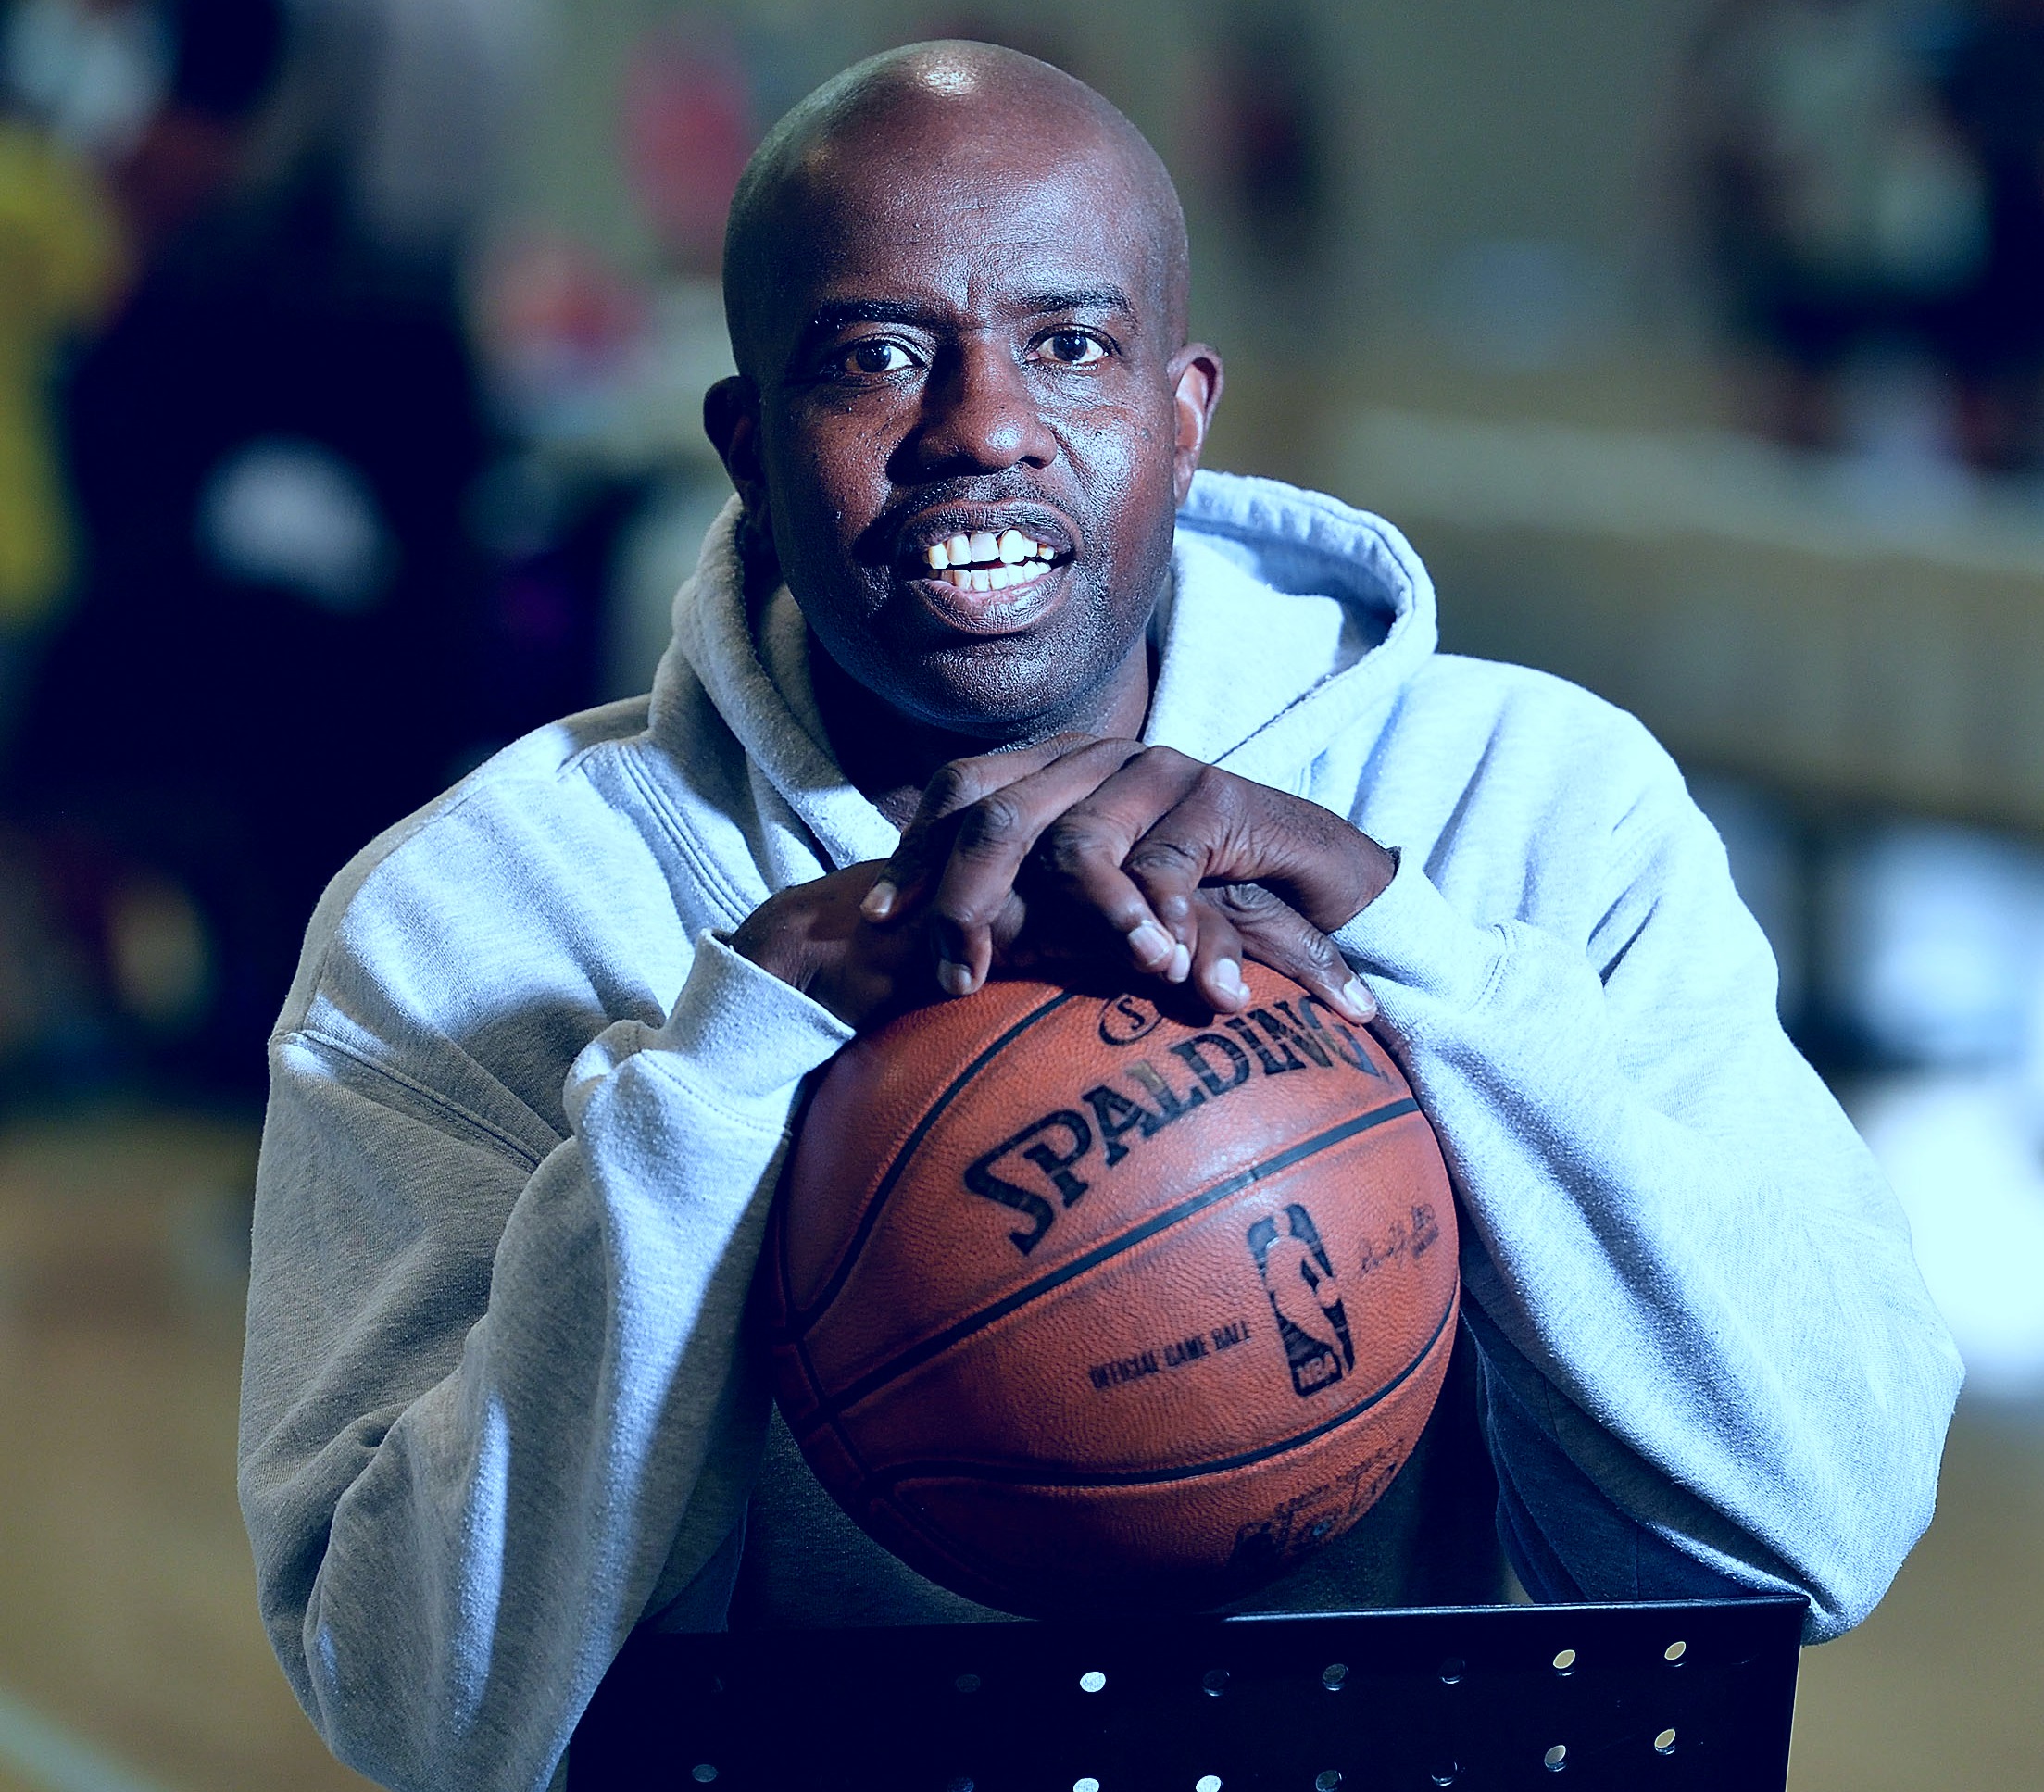 A famous basketball player from New Zealand, Kenny McFadden, has passed away